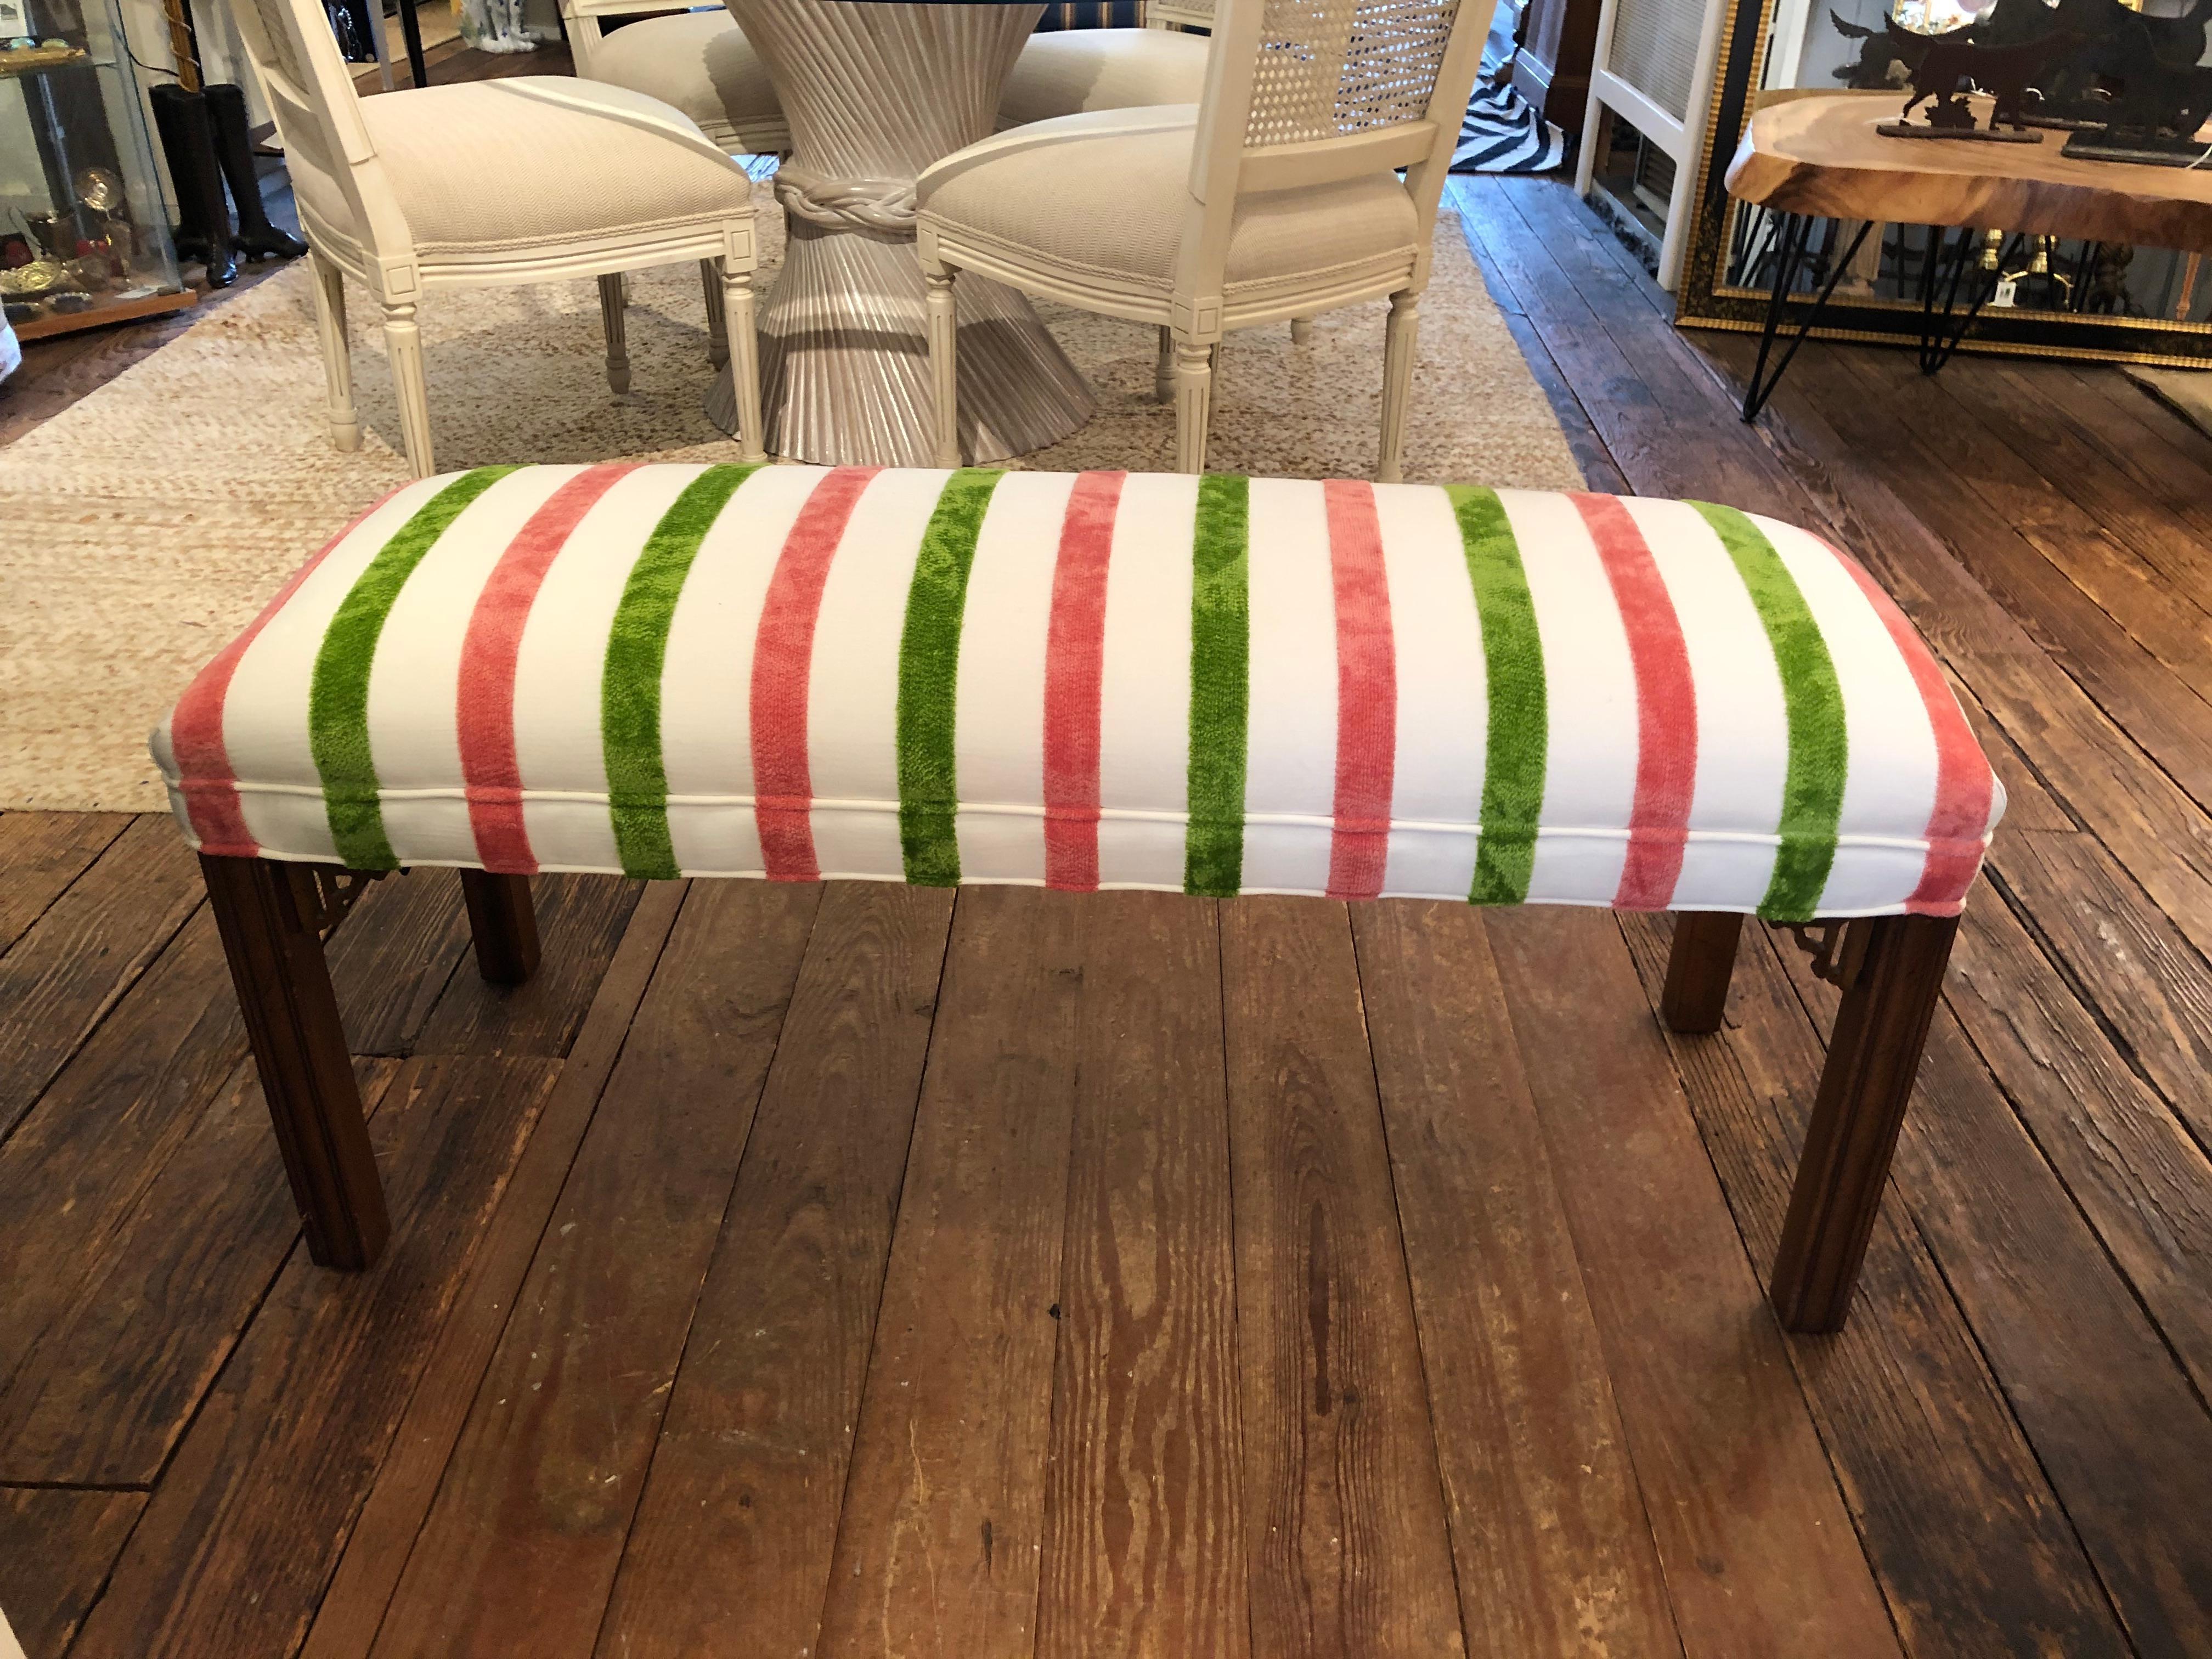 Stylish classic bench having lovely carved wooden legs with classic fretwork detailing at the top of the legs.  The new luxurious upholstered seat is a gorgeous cut velvet with raised pink and green stripes against cream background.  